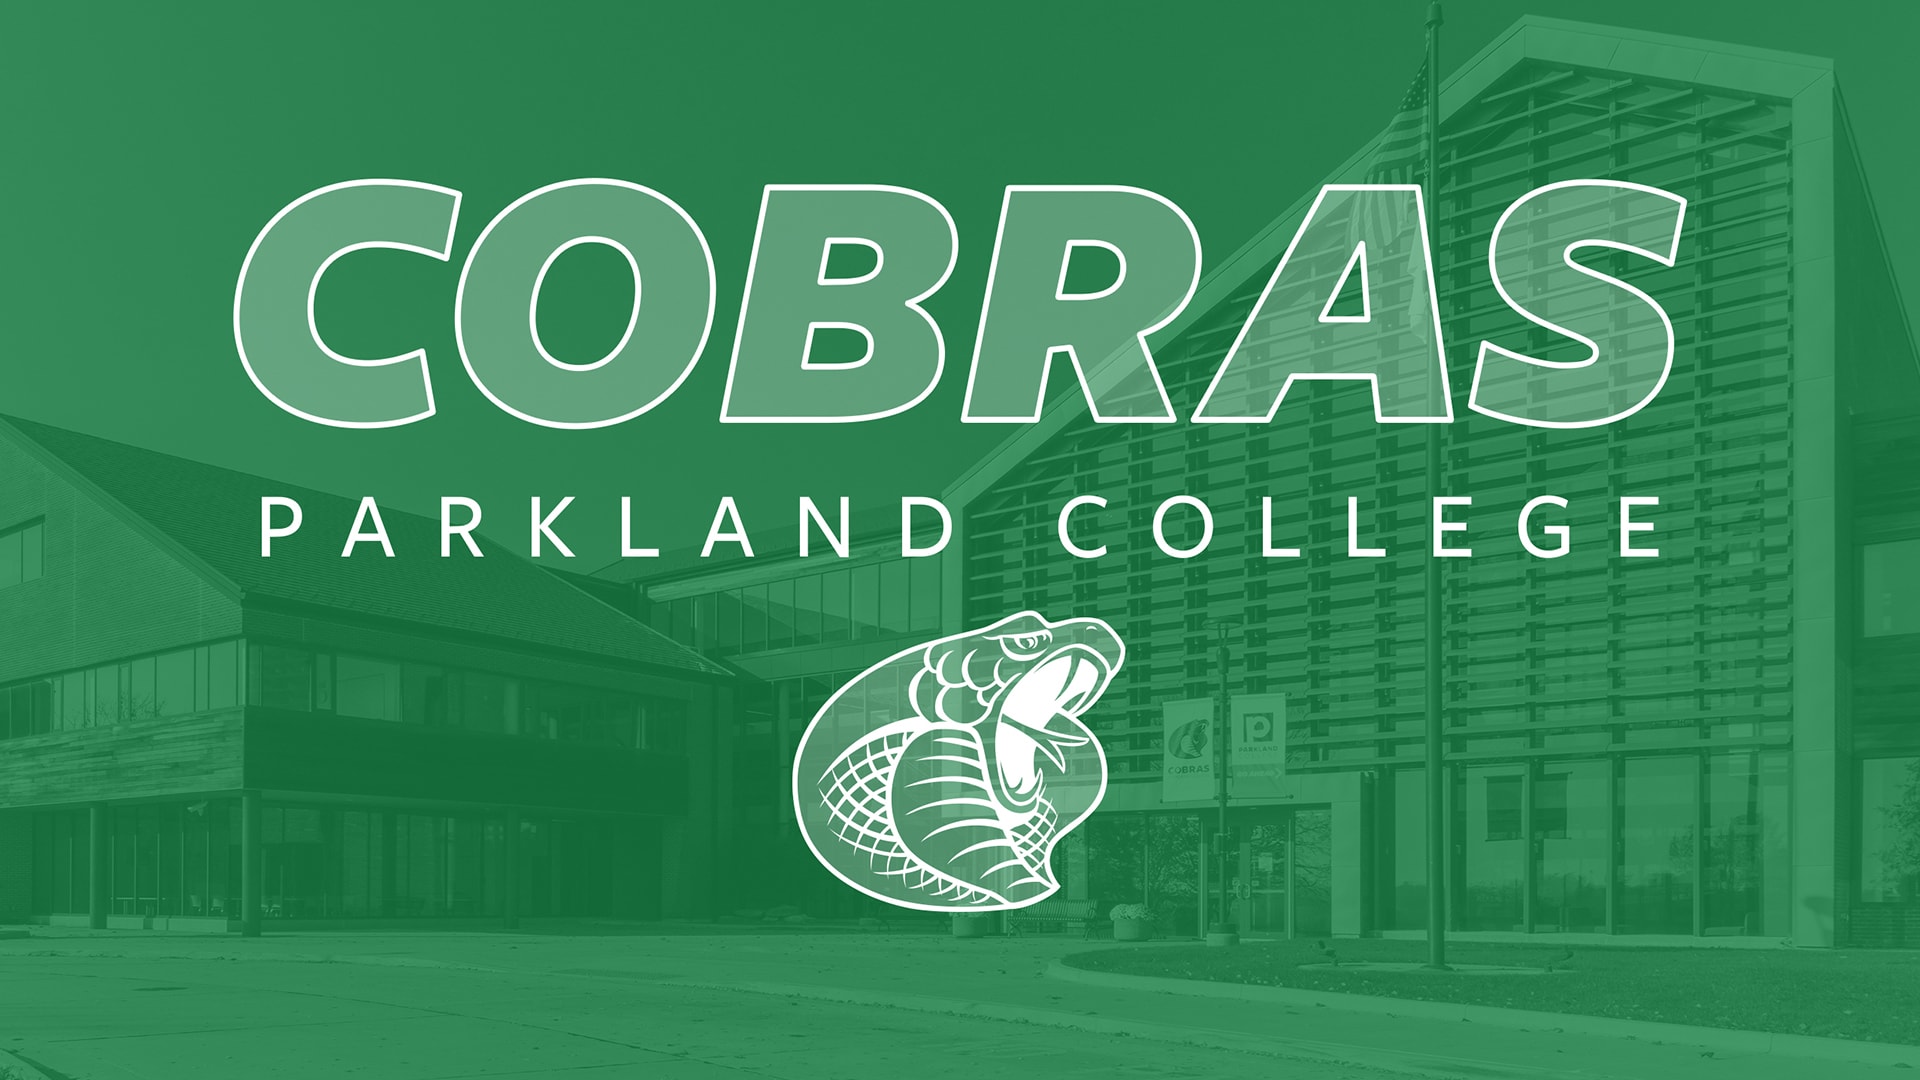 green with text parkland college cobras over campus exterior